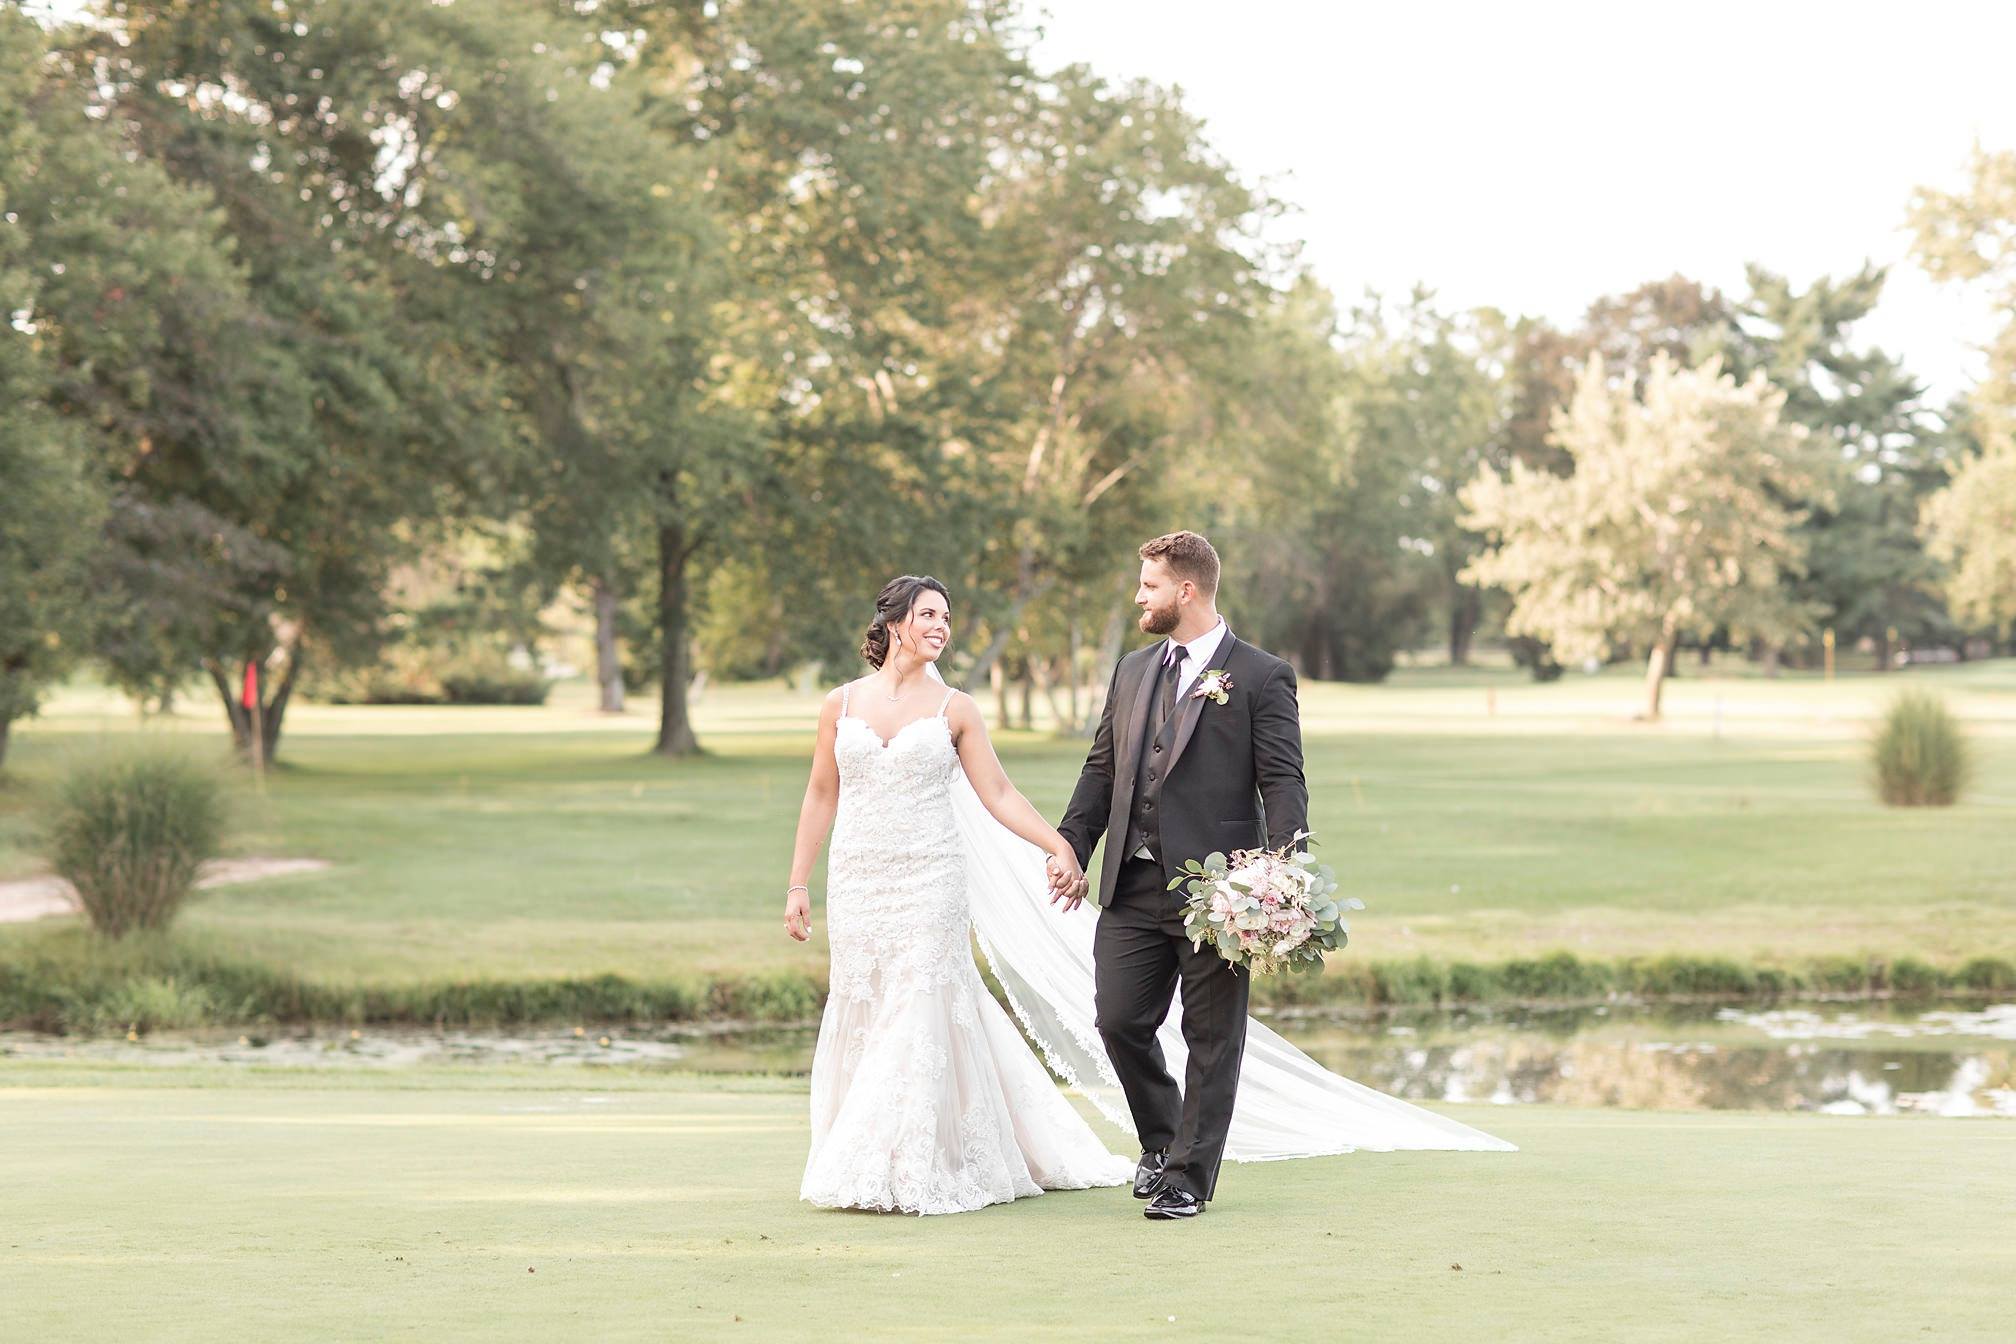 4 Reasons Why Getting Married on a Golf Course is a Good Idea